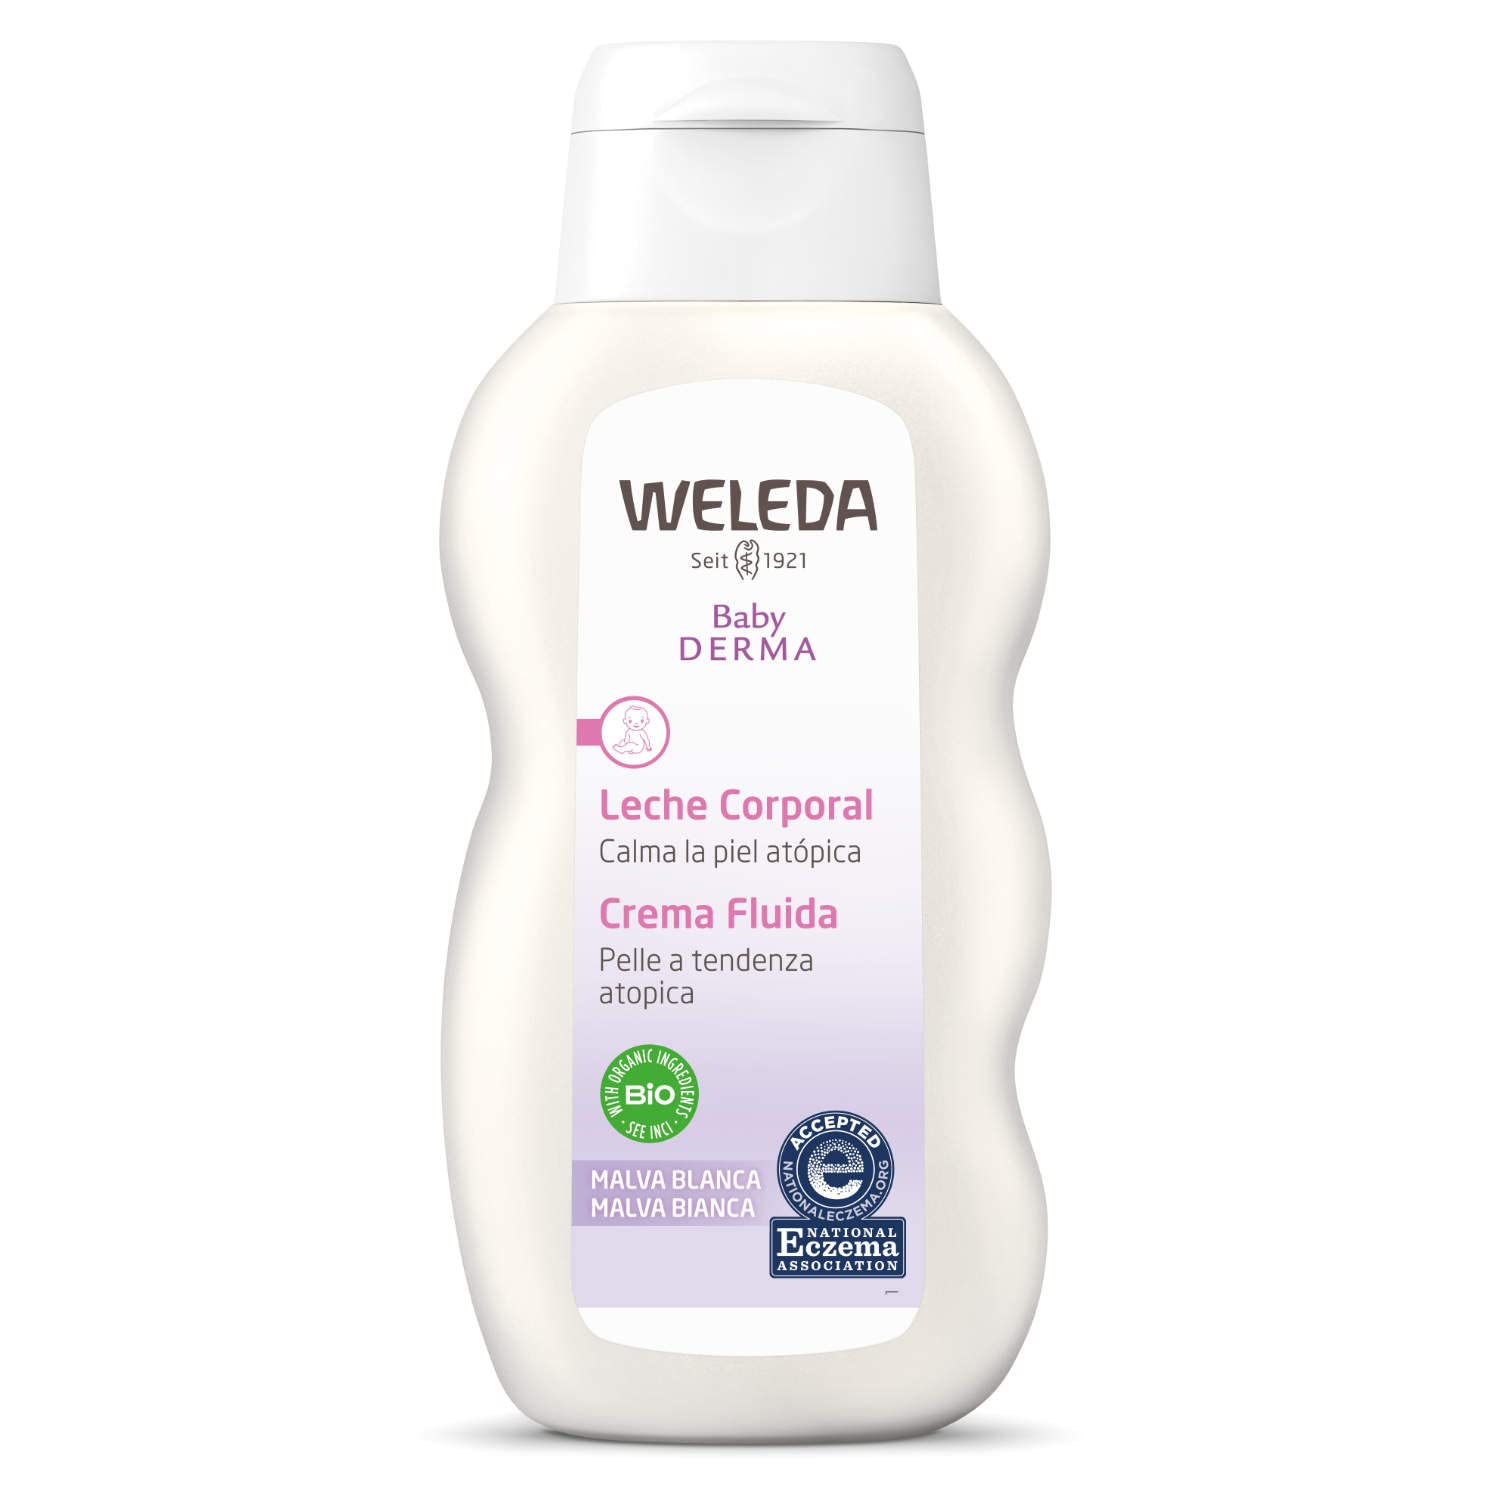 WELEDA Baby Derma White Mauve Care Lotion, Natural Cosmetics Moisturising Body Lotion for Soothing Highly Sensitive, Neurodermatitis and Dry Skin, Lotion for Intensive Care (1 x 200 ml)